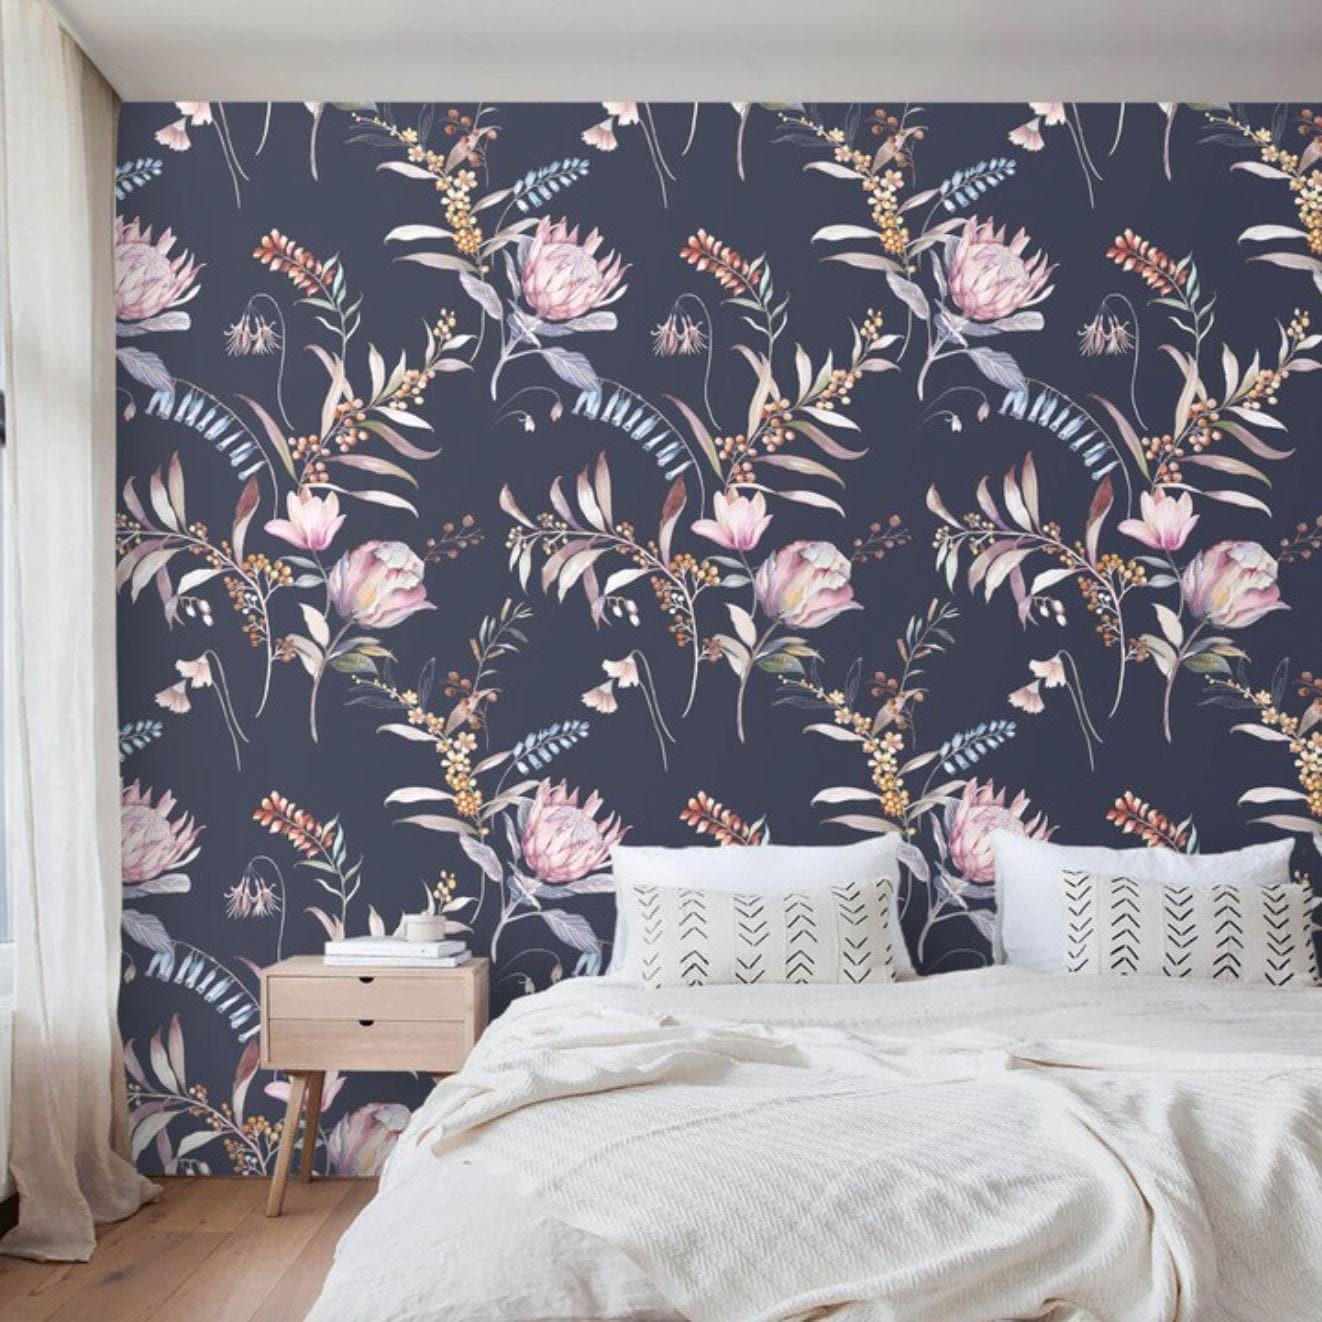 Large Floral in the Dark Wallpaper - MAIA HOMES